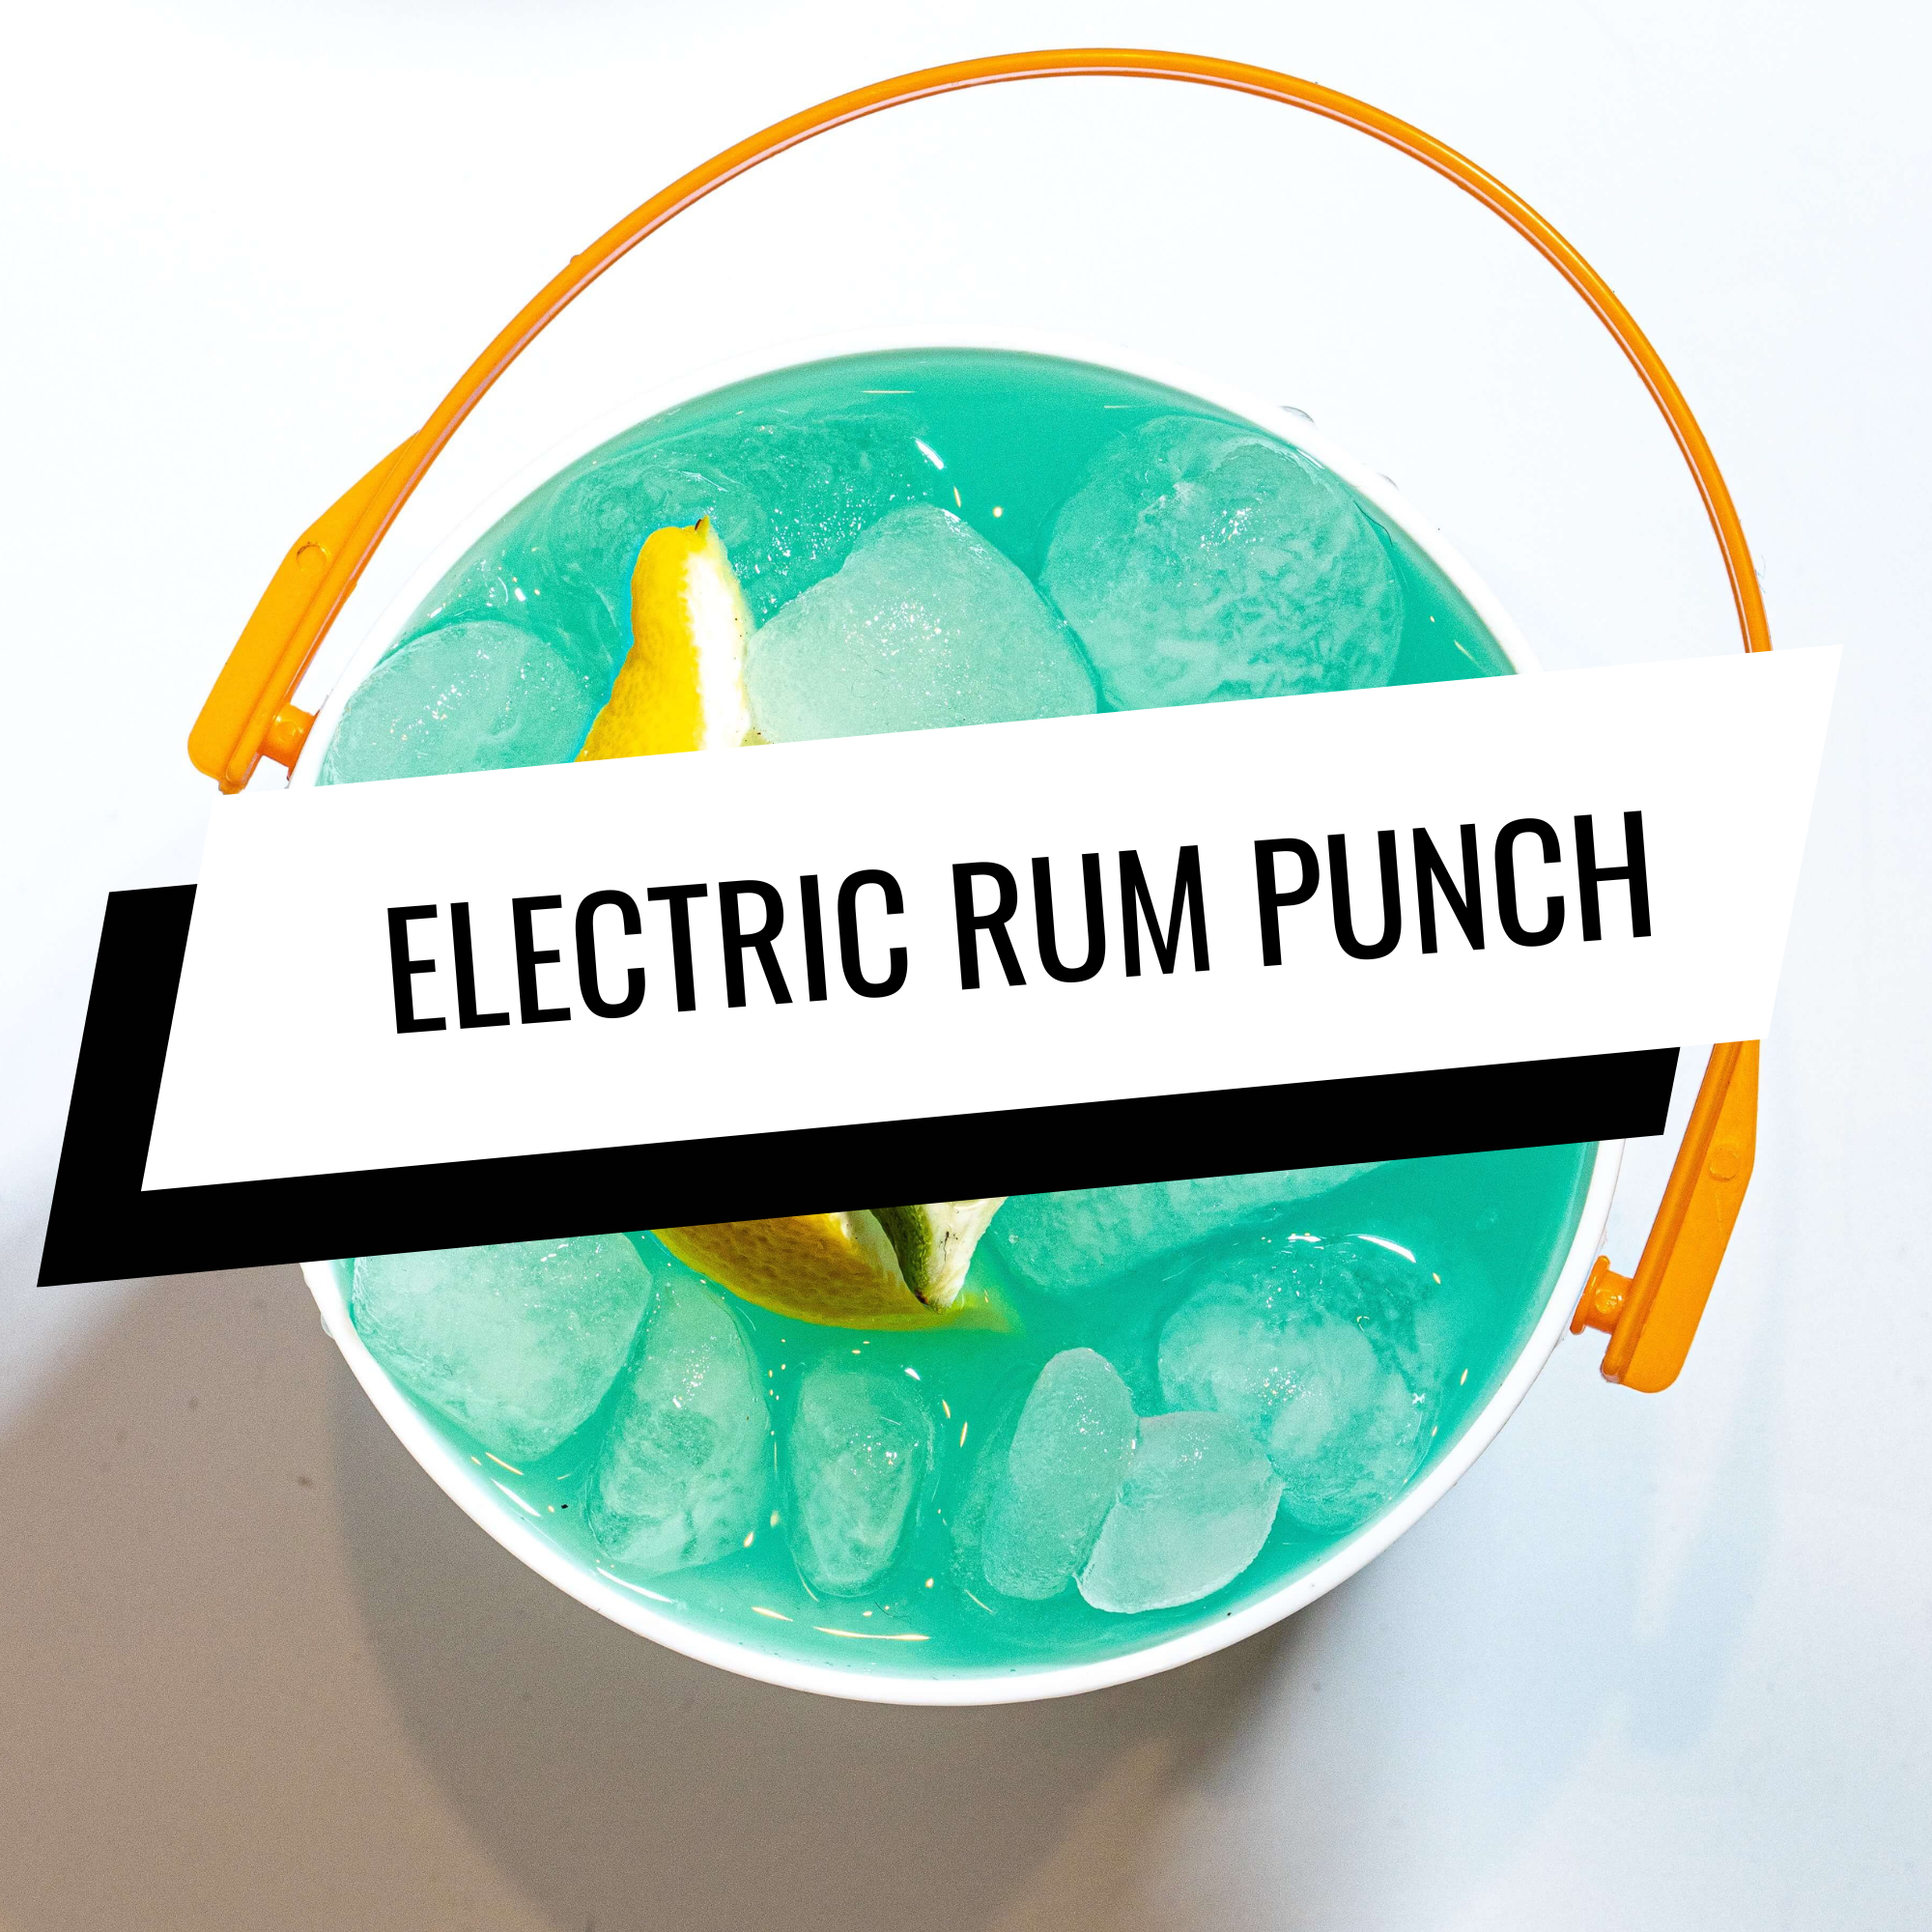 ELECTRIC RUM PUNCH